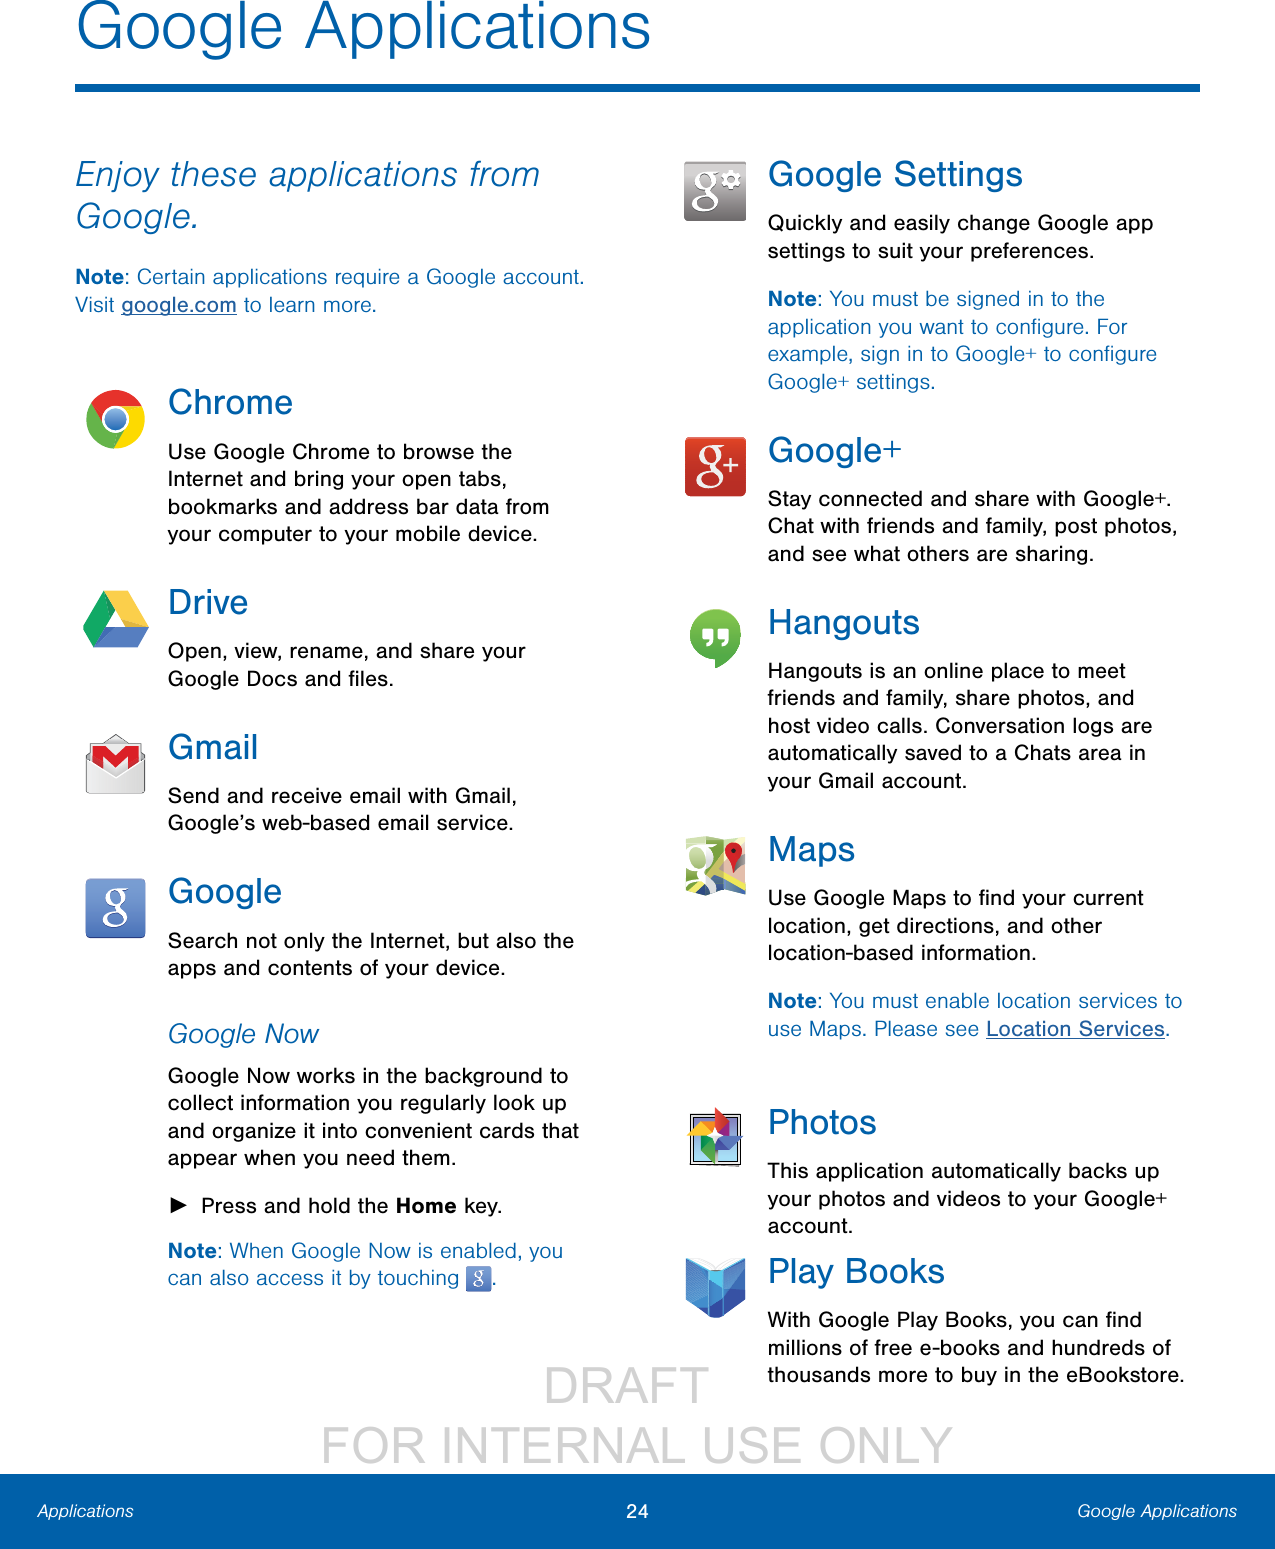                 DRAFT FOR INTERNAL USE ONLY24 Google ApplicationsApplicationsEnjoy these applications from Google.Note: Certain applications require a Google account. Visit google.com to learn more.ChromeUse Google Chrome to browse the Internet and bring your open tabs, bookmarks and address bar data from your computer to your mobile device.DriveOpen, view, rename, and share your Google Docs and ﬁles.GmailSend and receive email with Gmail, Google’s web-based email service.GoogleSearch not only the Internet, but also the apps and contents of your device.Google NowGoogle Now works in the background to collect information you regularly look up and organize it into convenient cards that appear when you need them. ►Press and hold the Home key.Note: When Google Now is enabled, you can also access it by touching  .Google SettingsQuickly and easily change Google app settings to suit your preferences.Note: You must be signed in to the application you want to conﬁgure. For example, sign in to Google+ to conﬁgure Google+ settings.Google+Stay connected and share with Google+. Chat with friends and family, post photos, and see what others are sharing.HangoutsHangouts is an online place to meet friends and family, share photos, and host video calls. Conversation logs are automatically saved to a Chats area in your Gmail account.MapsUse Google Maps to ﬁnd your current location, get directions, and other location-based information.Note: You must enable location services to use Maps. Please see Location Services.PhotosThis application automatically backs up your photos and videos to your Google+ account.Play BooksWith Google Play Books, you can ﬁnd millions of free e-books and hundreds of thousands more to buy in the eBookstore.Google Applications